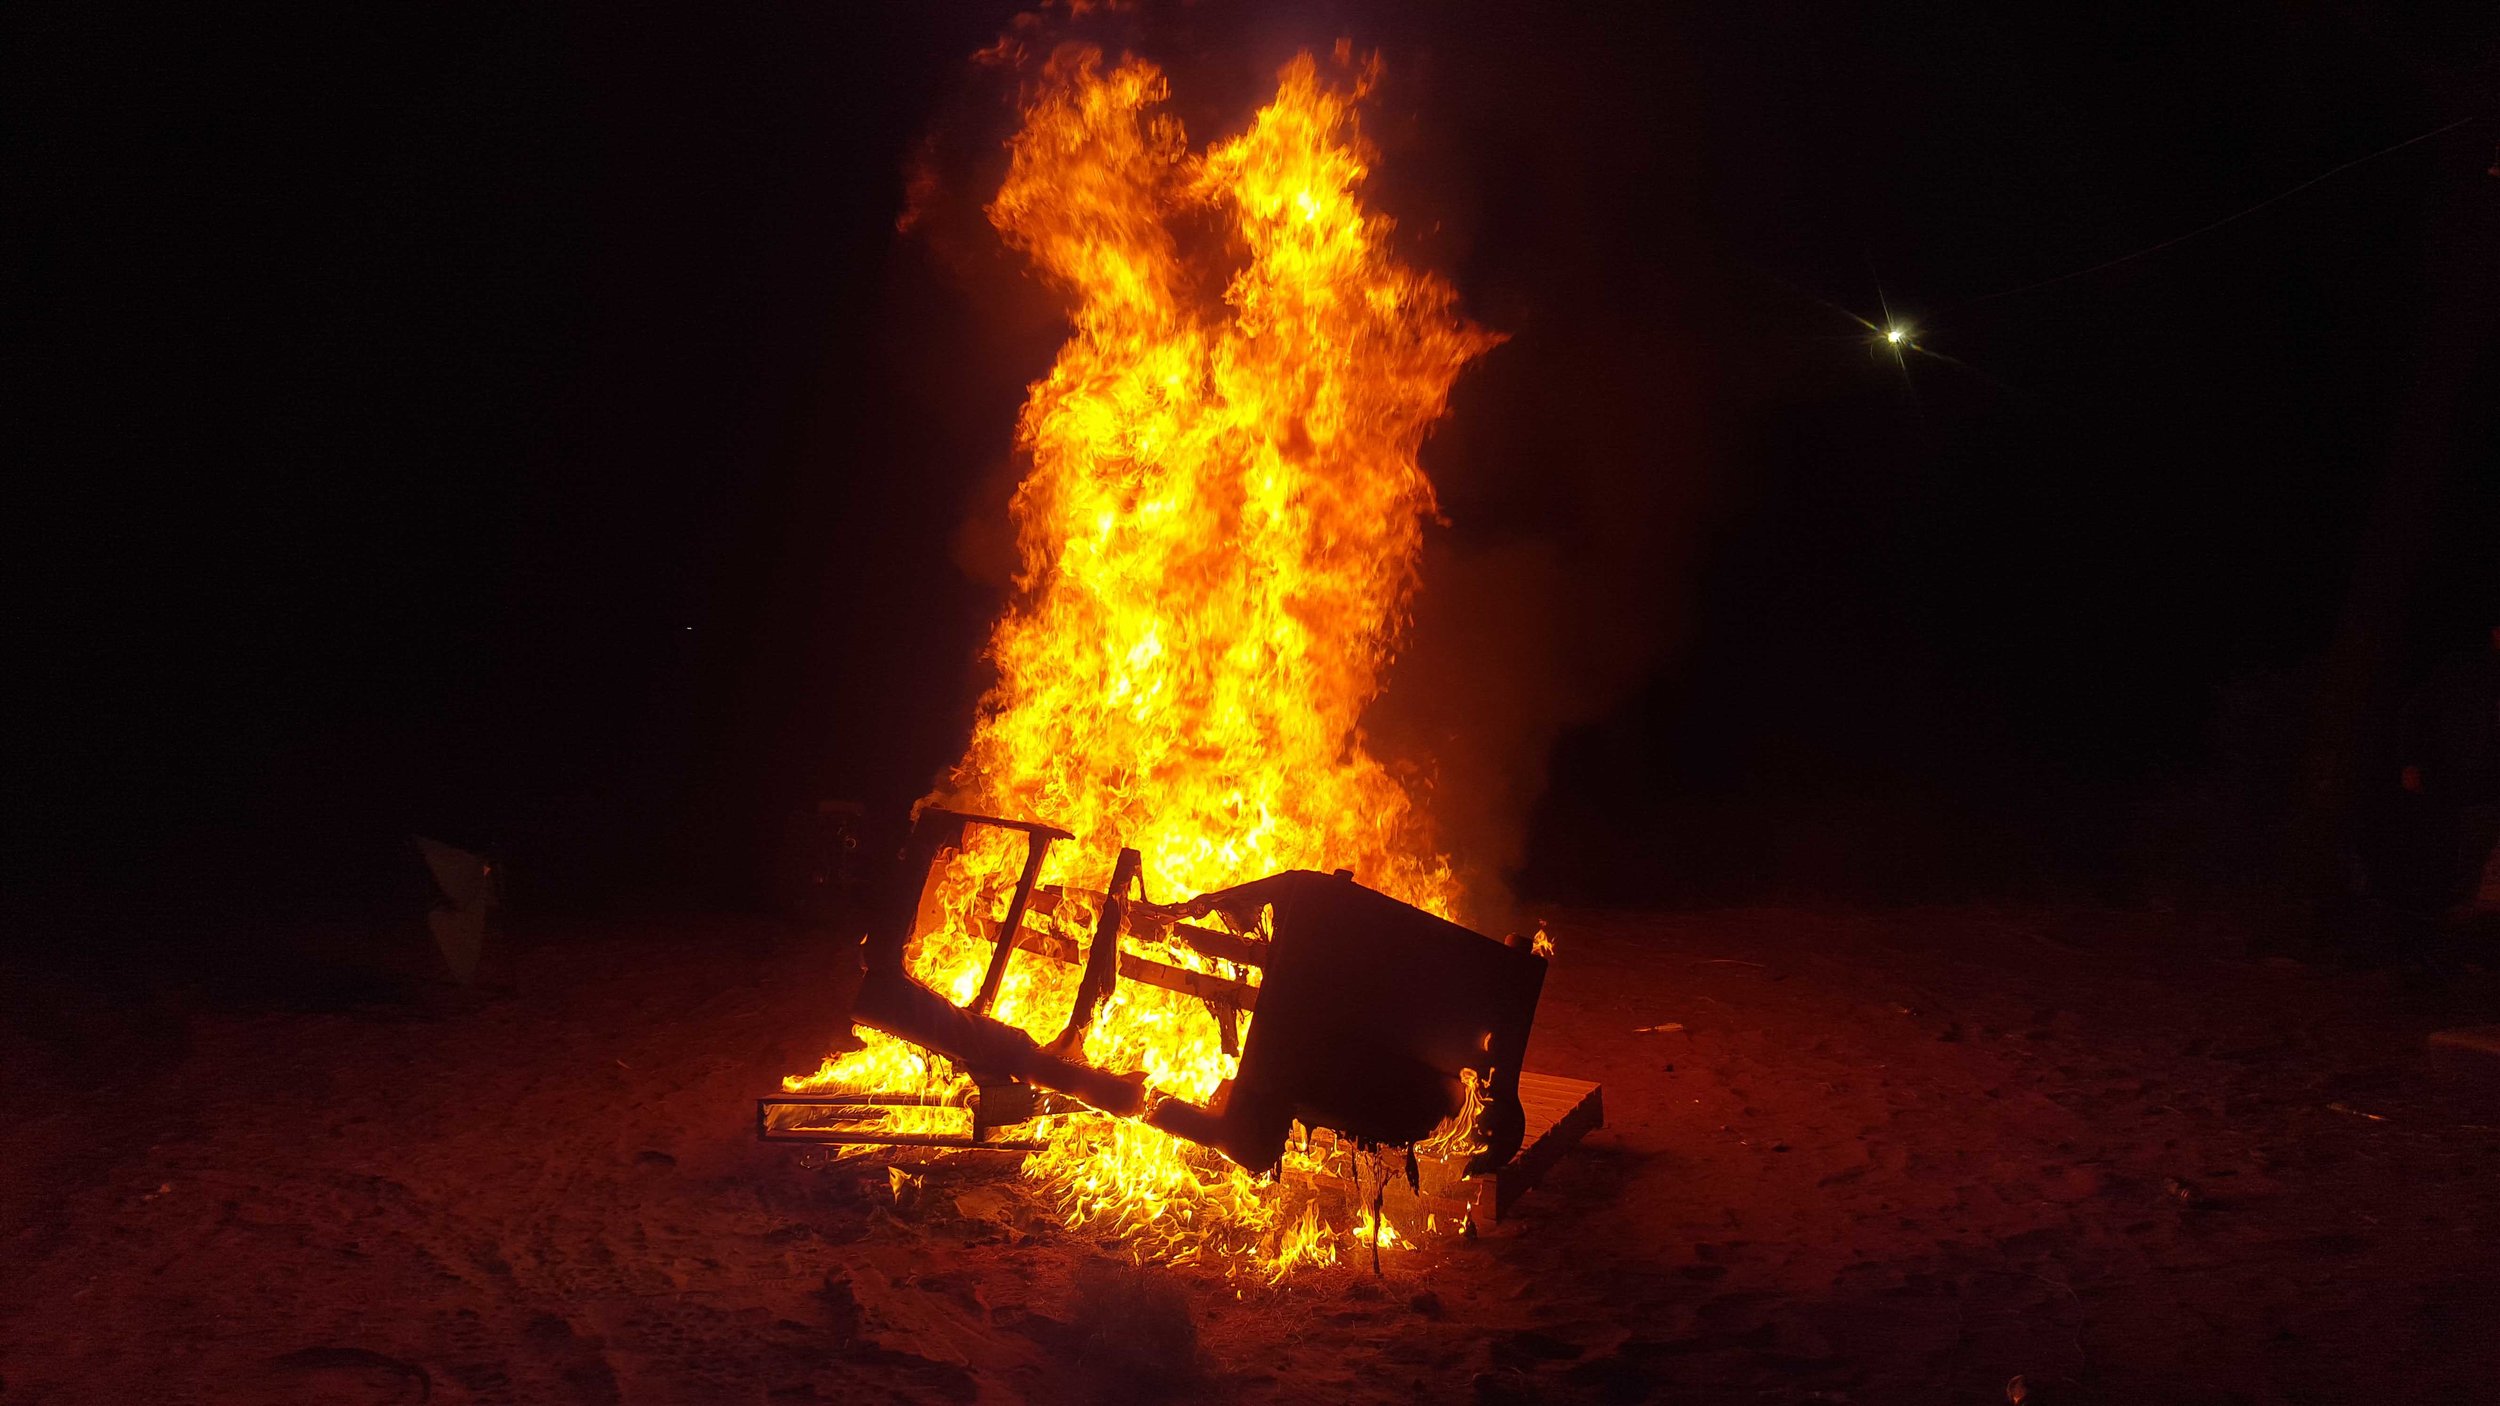  It wouldn't be a party without a bonfire. Tuffy/XR3PG image. 